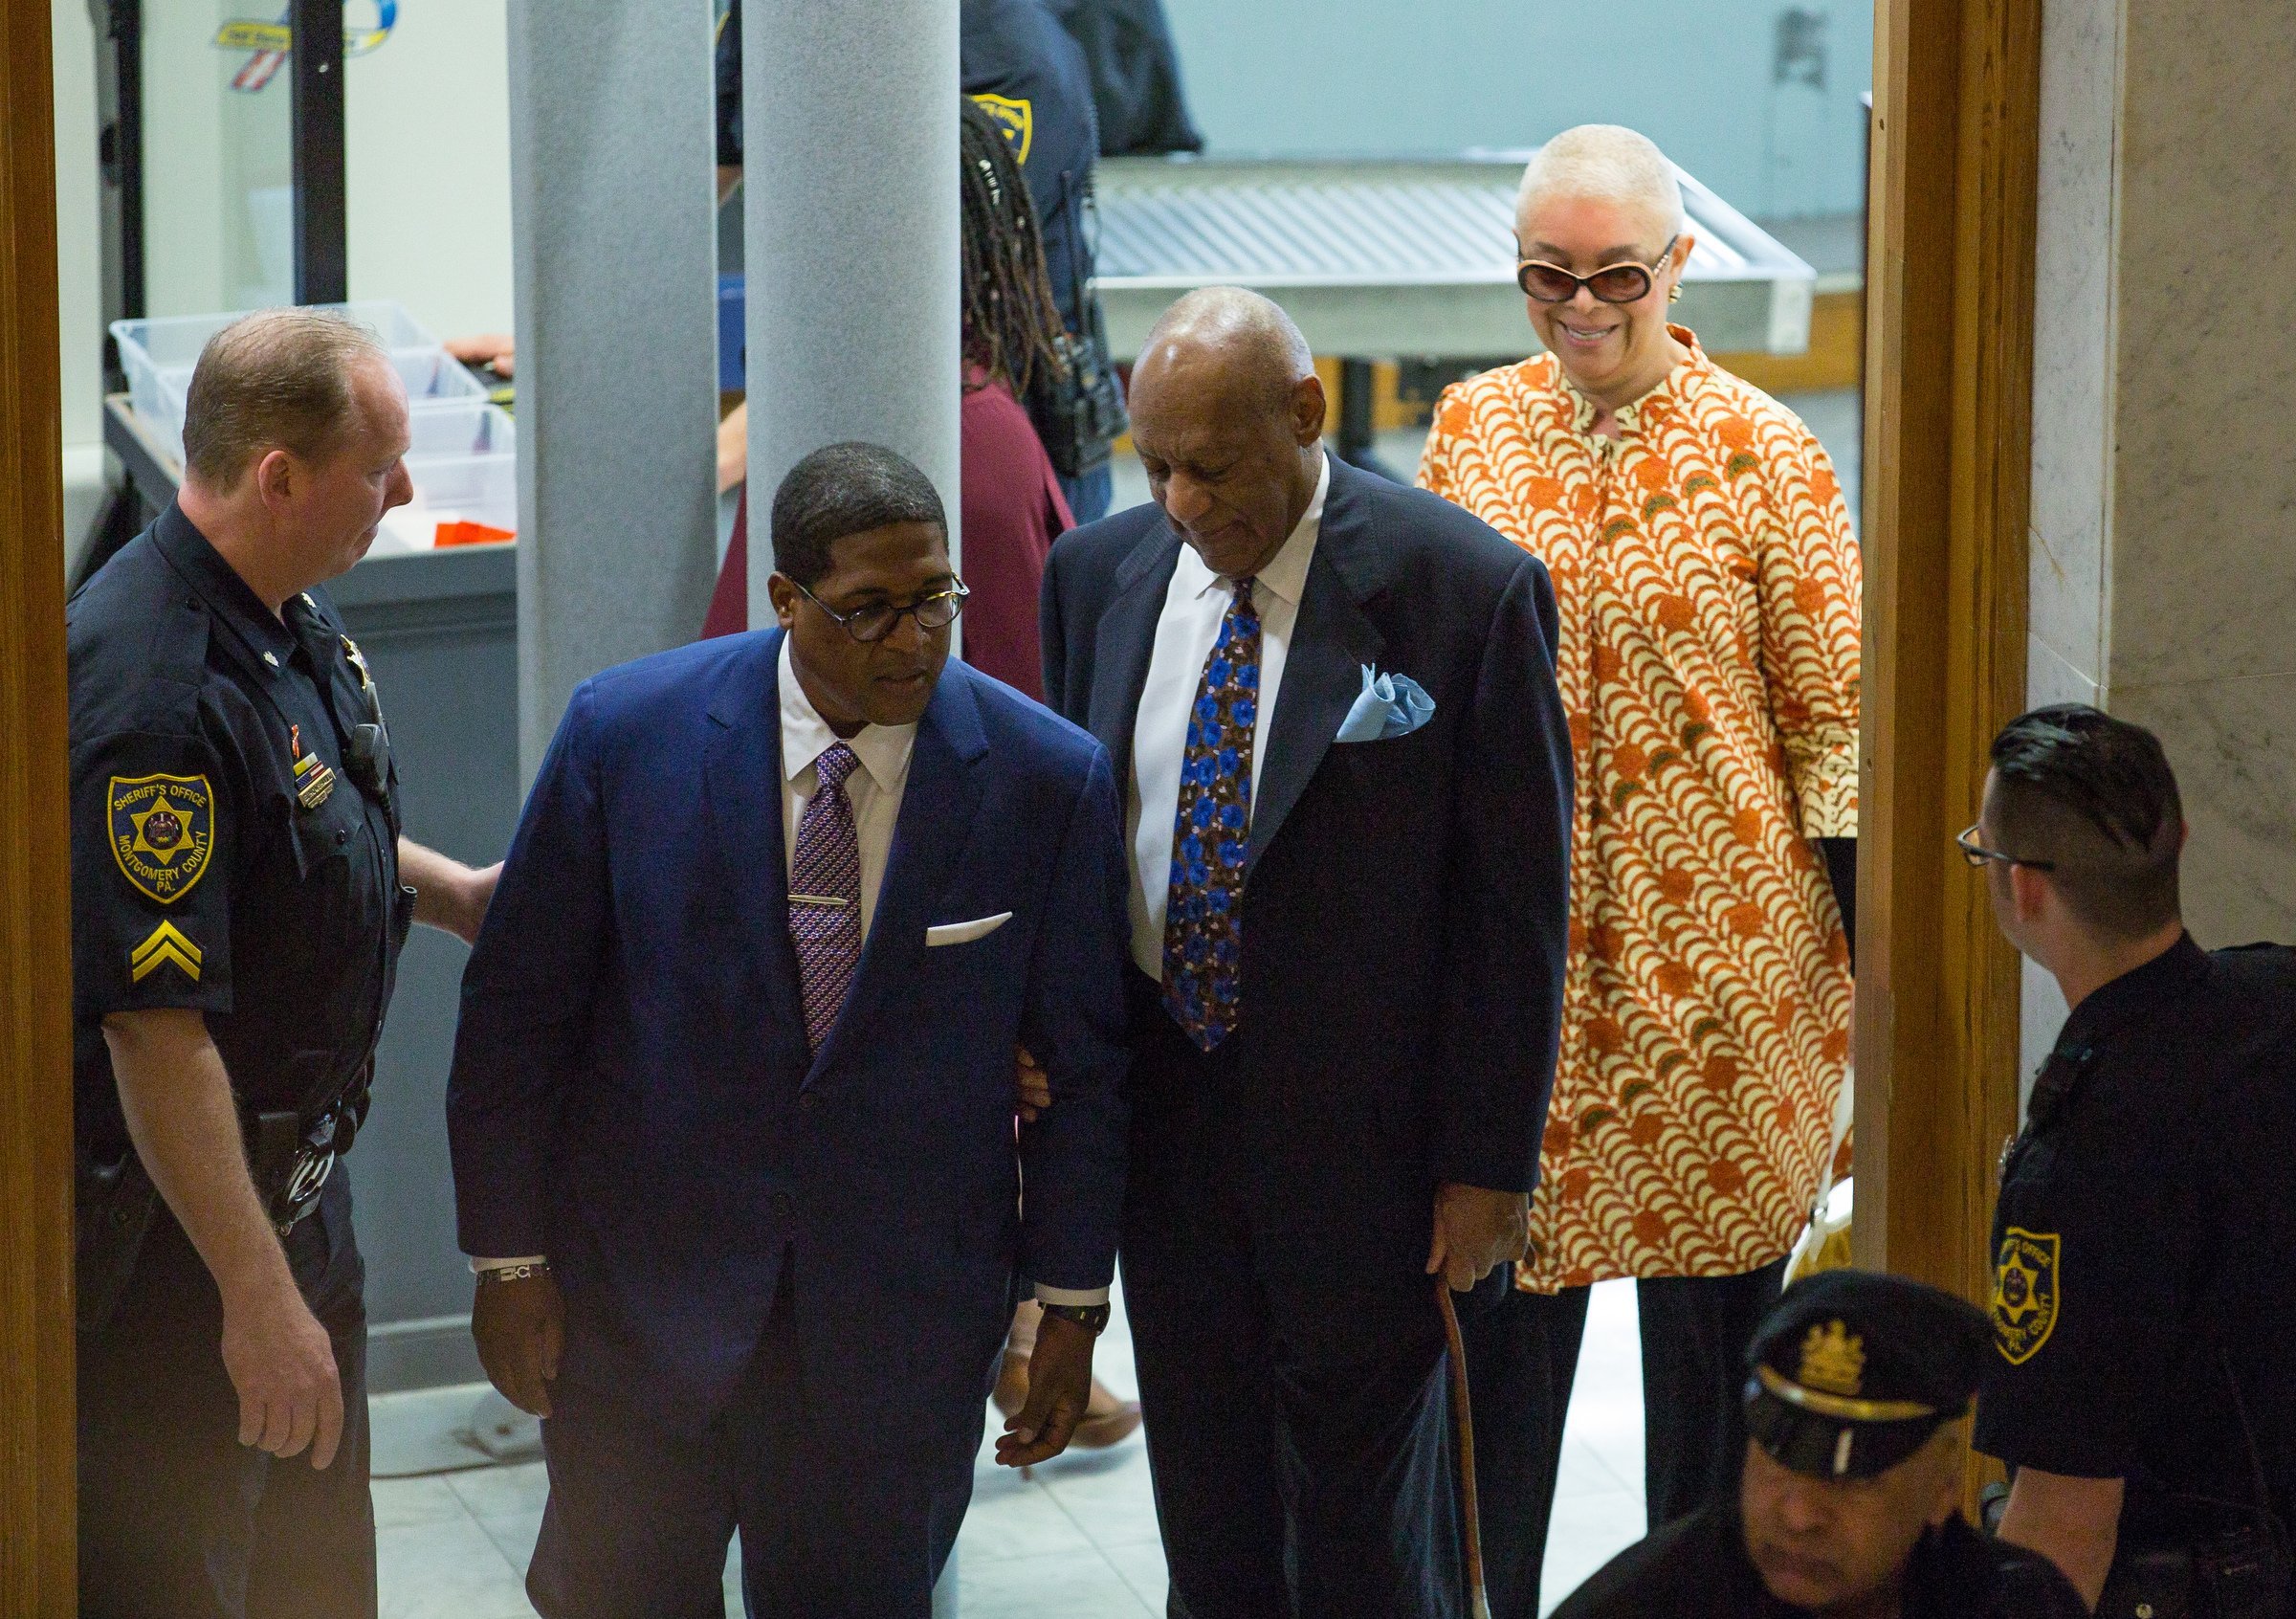 Camille Cosby and Bill Cosby arrive for his sexual assault trial April 24, 2018 at the Montgomery County Courthouse in Norristown, Pennsylvania. | Photo: GettyImages